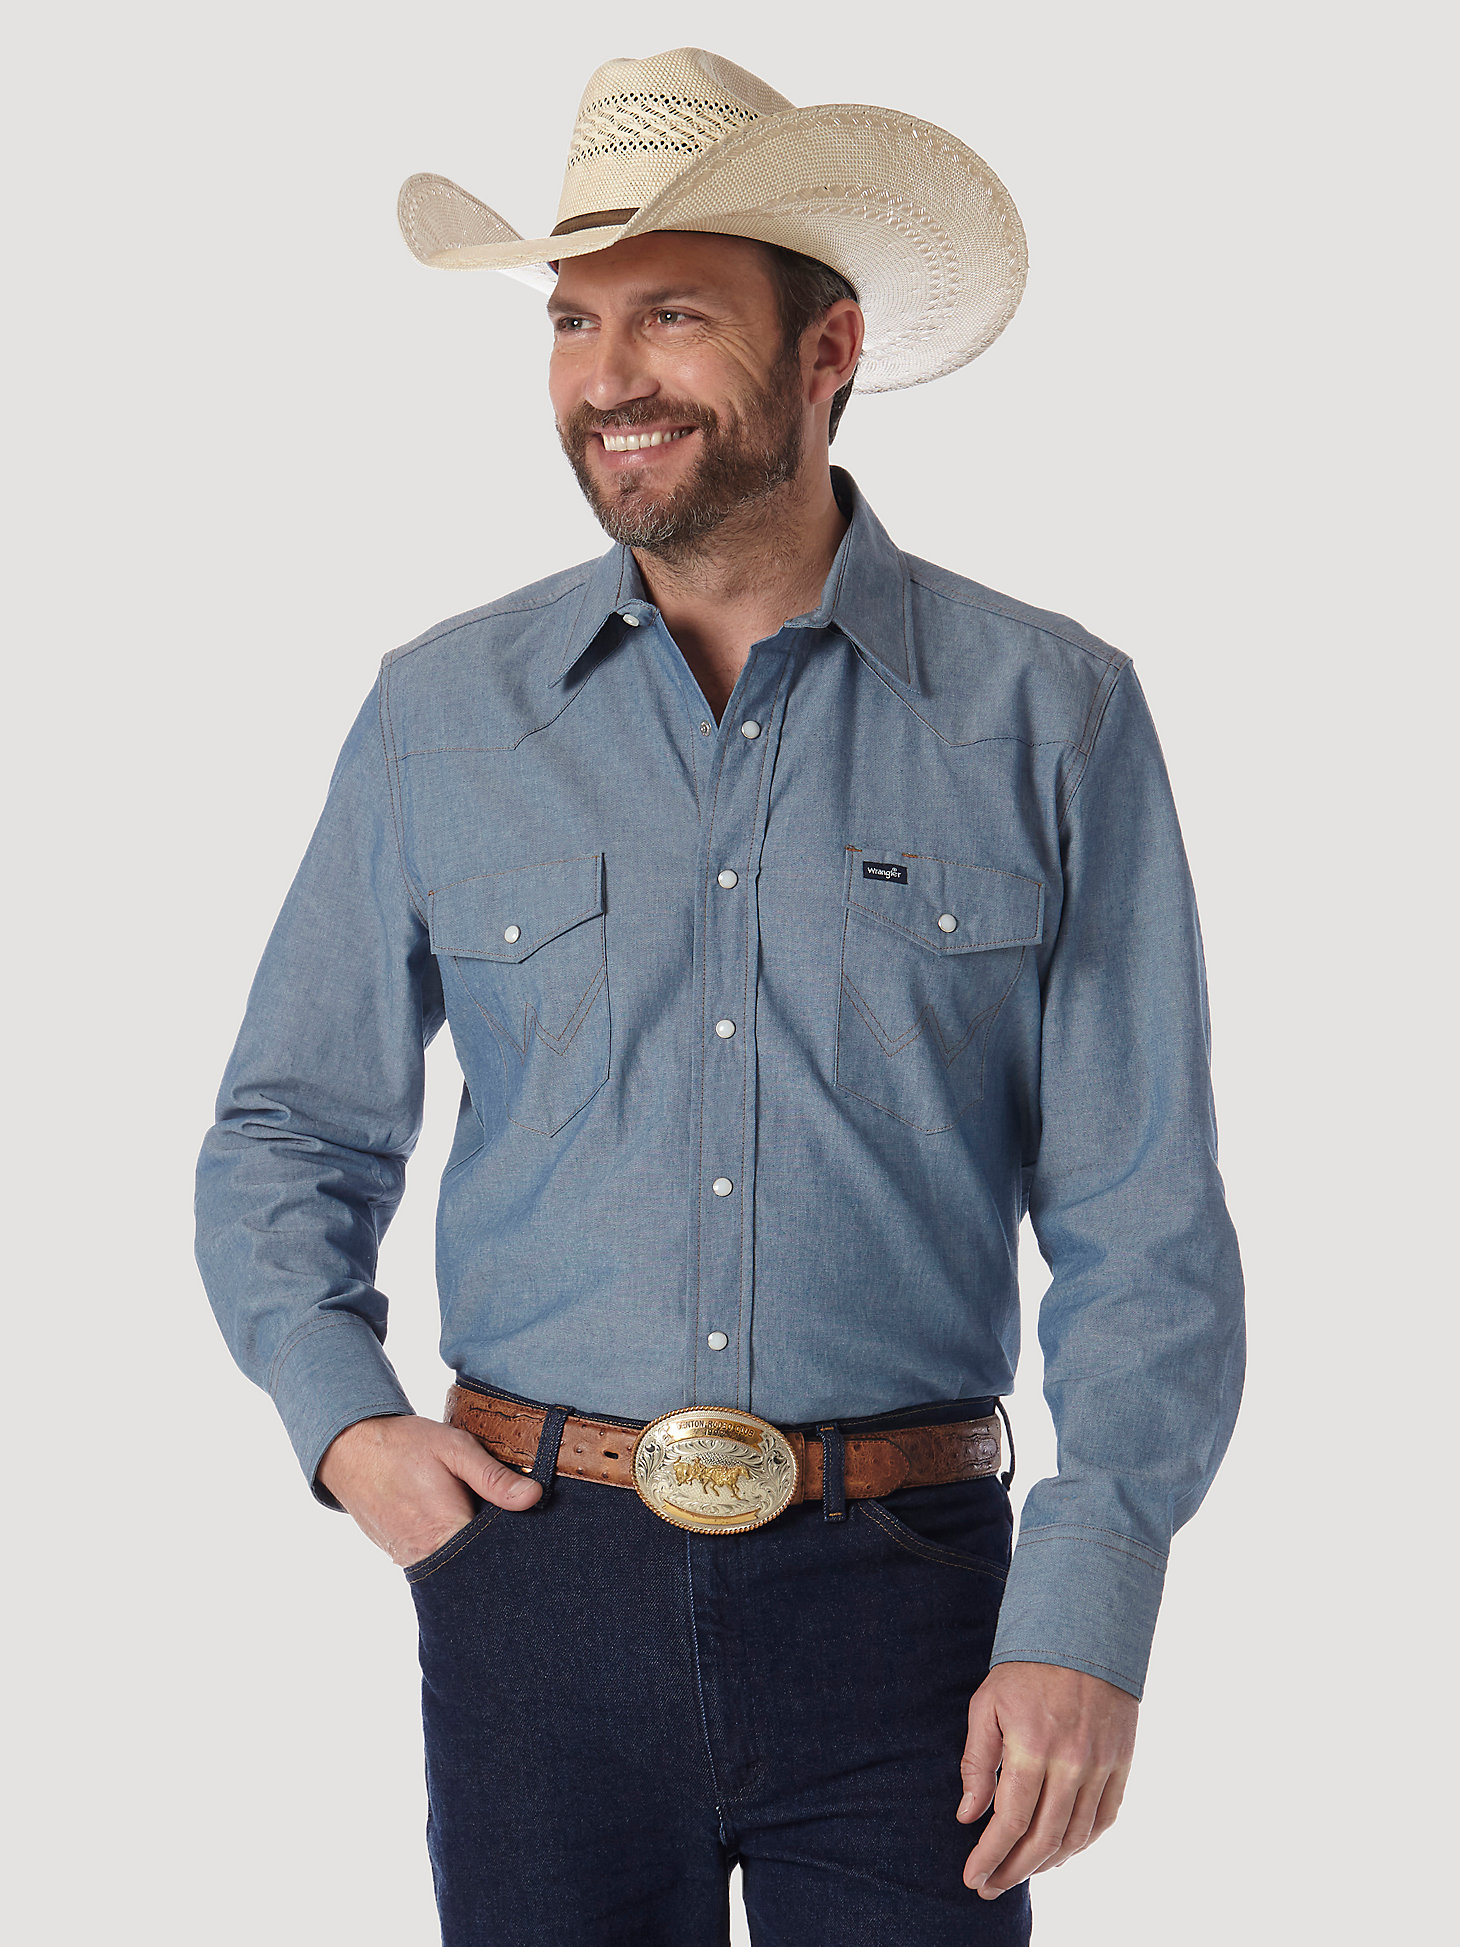 Cowboy Cut® Firm Finish Long Sleeve Western Snap Solid Work Shirt in Chambray Blue alternative view 1